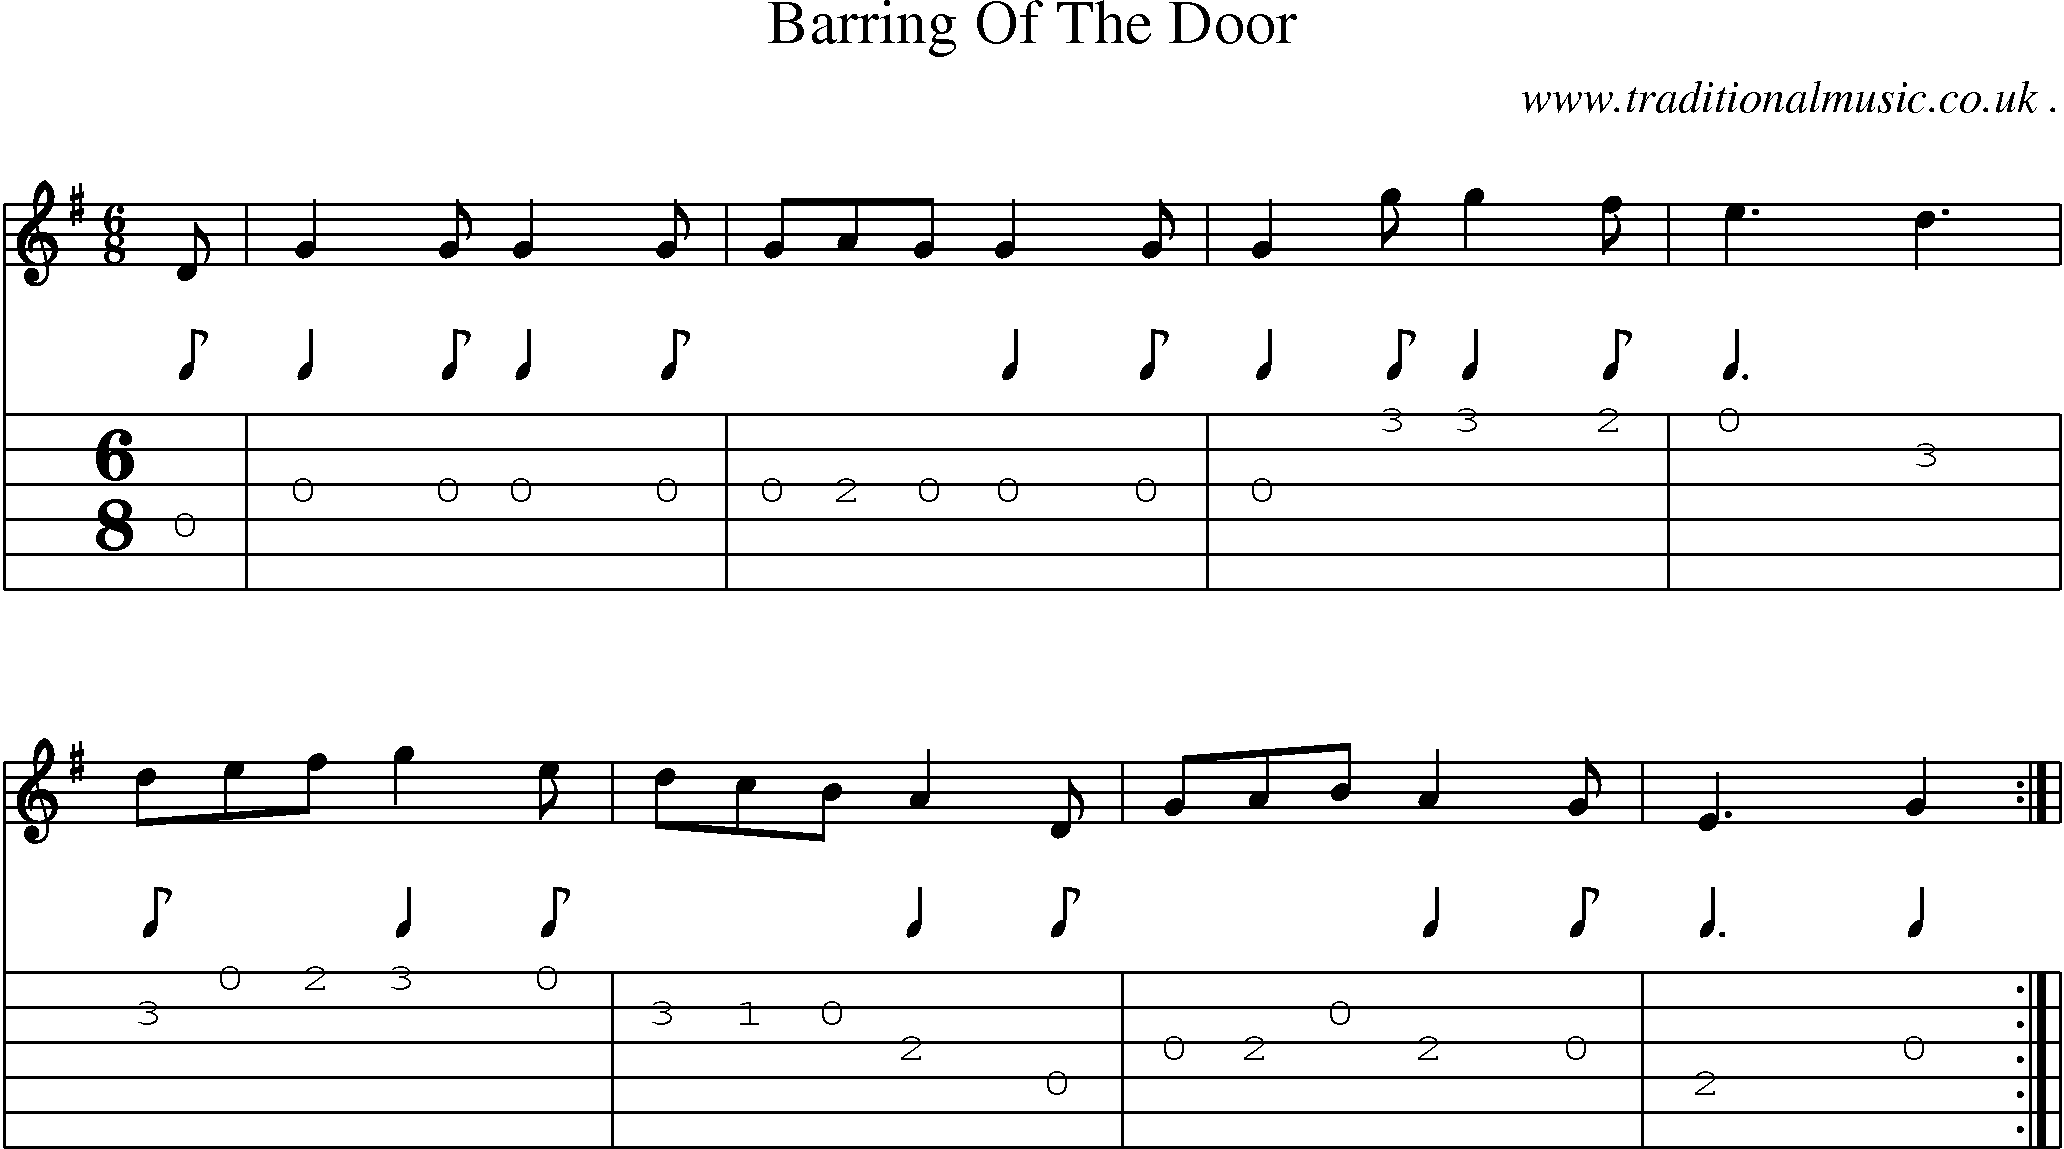 Sheet-Music and Guitar Tabs for Barring Of The Door